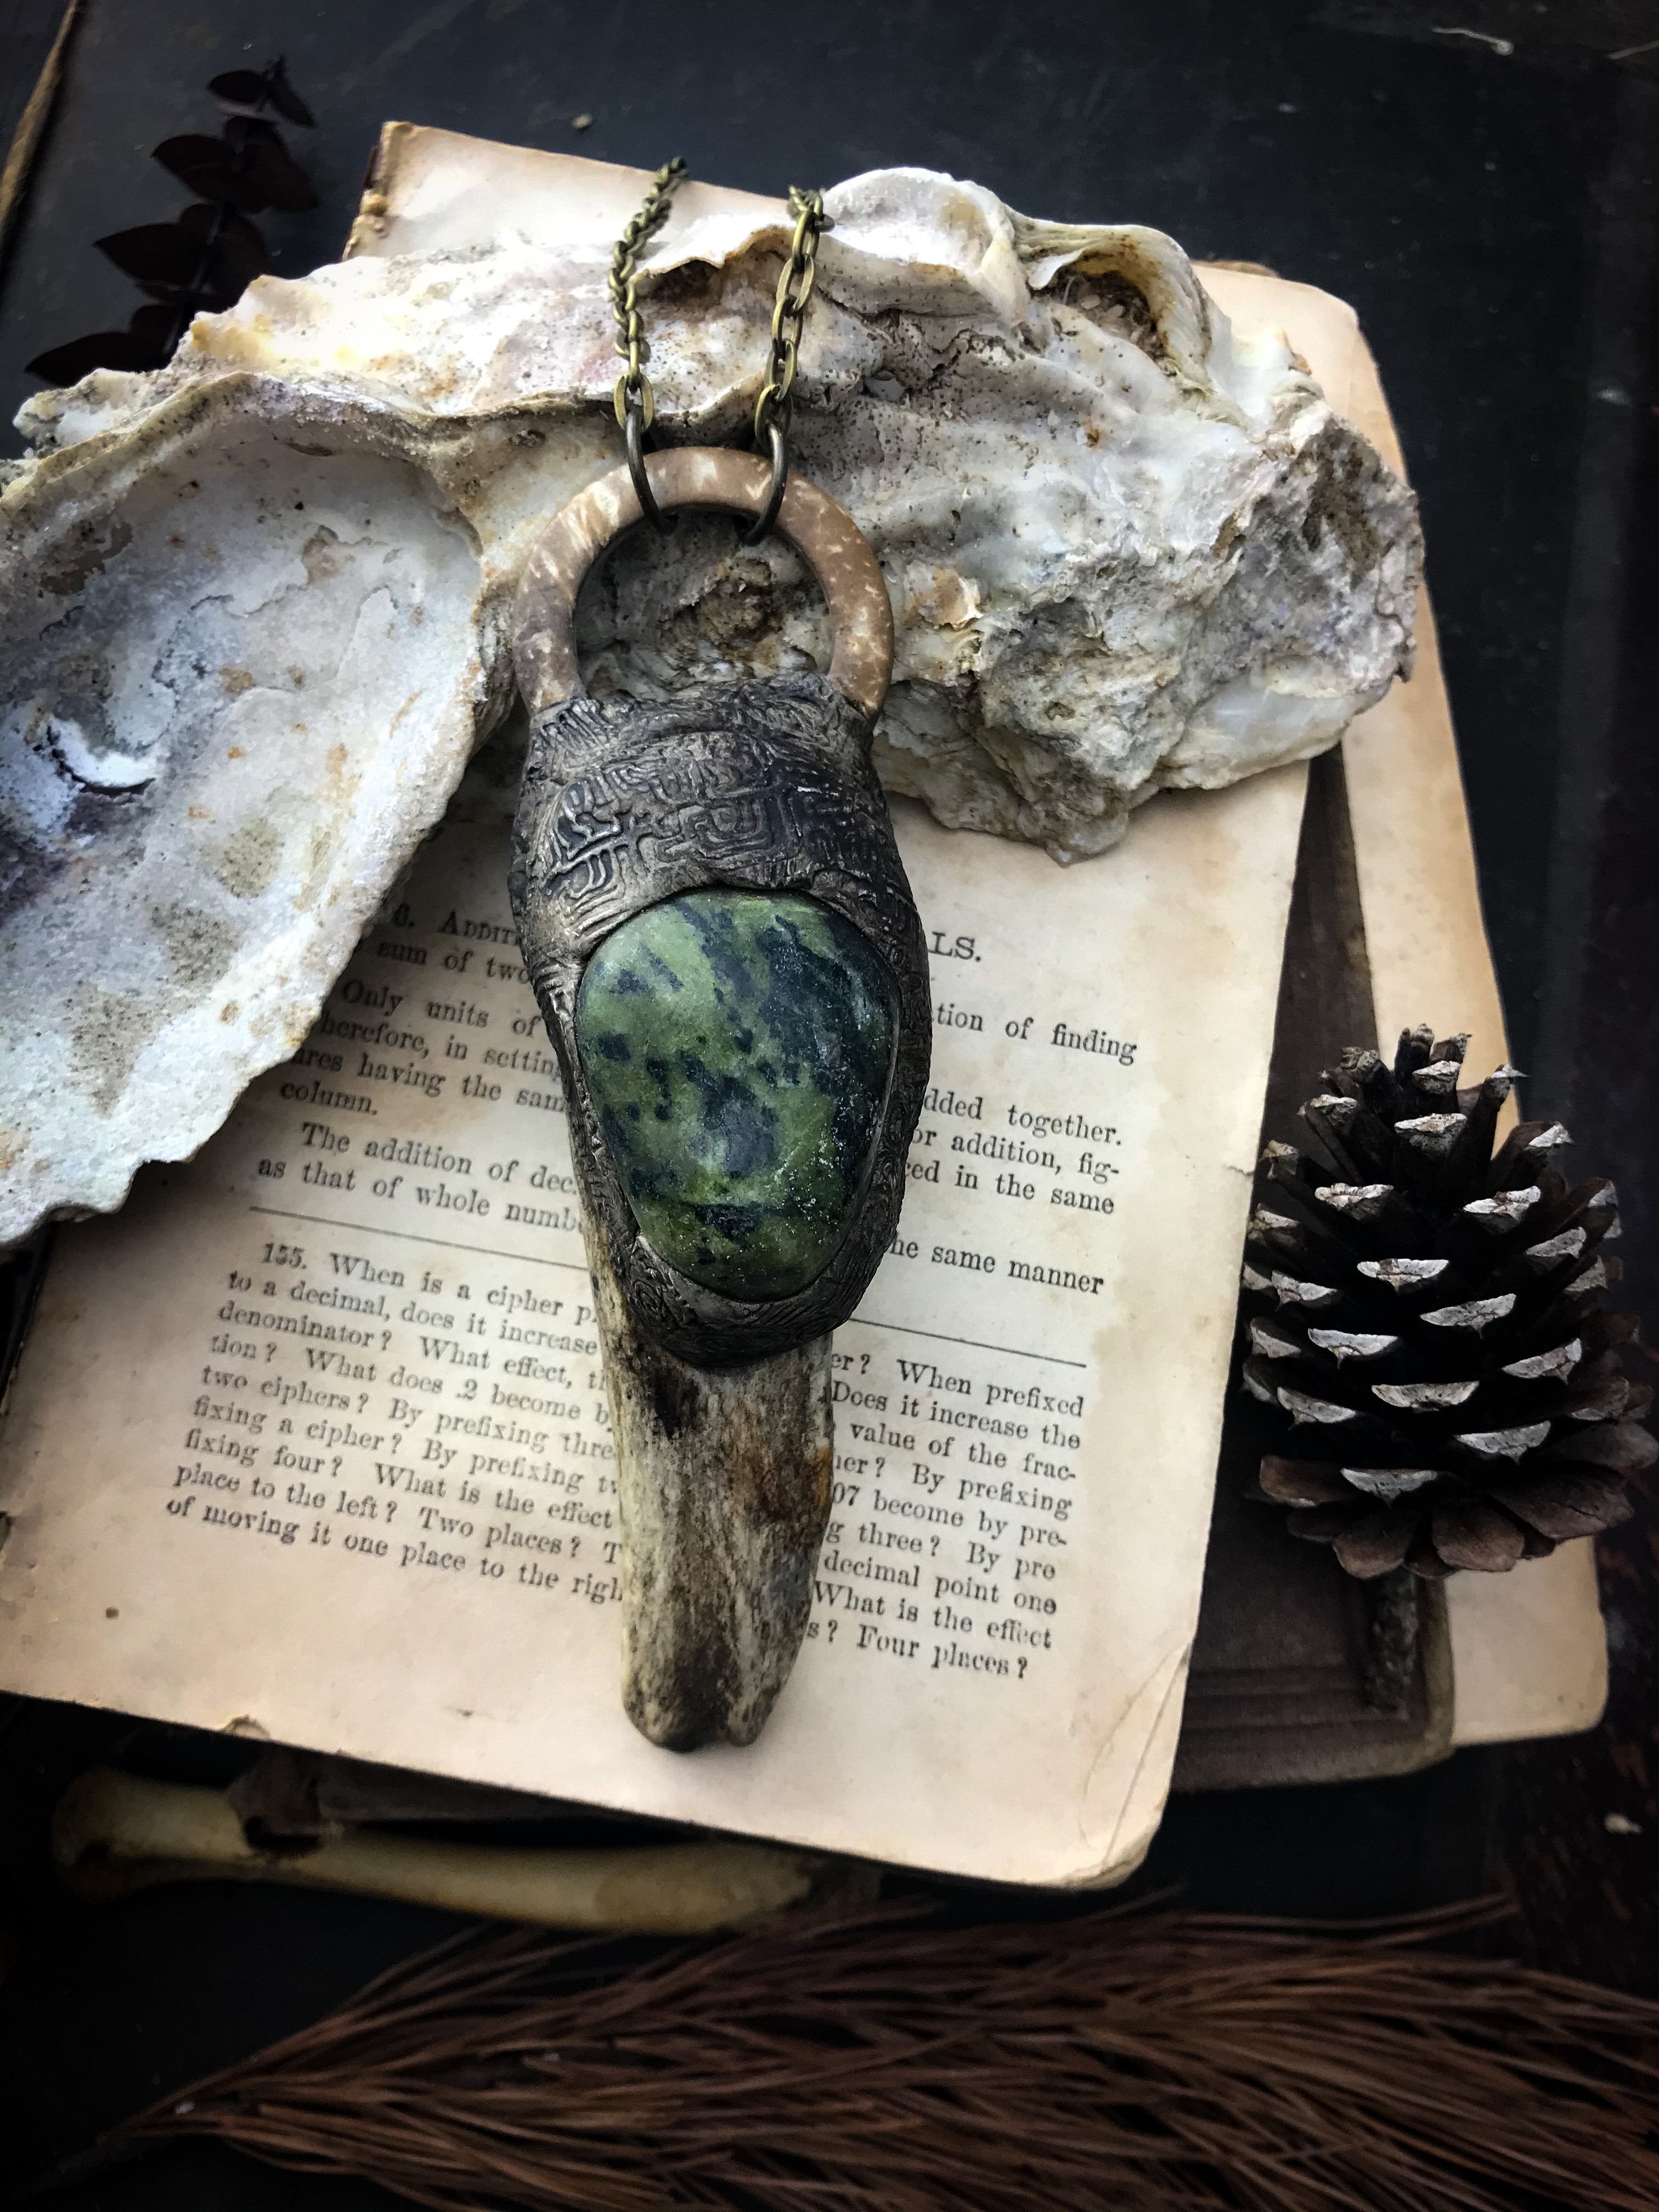 Antler + Jade Necklace for Truth, Stillness and Inner Knowing